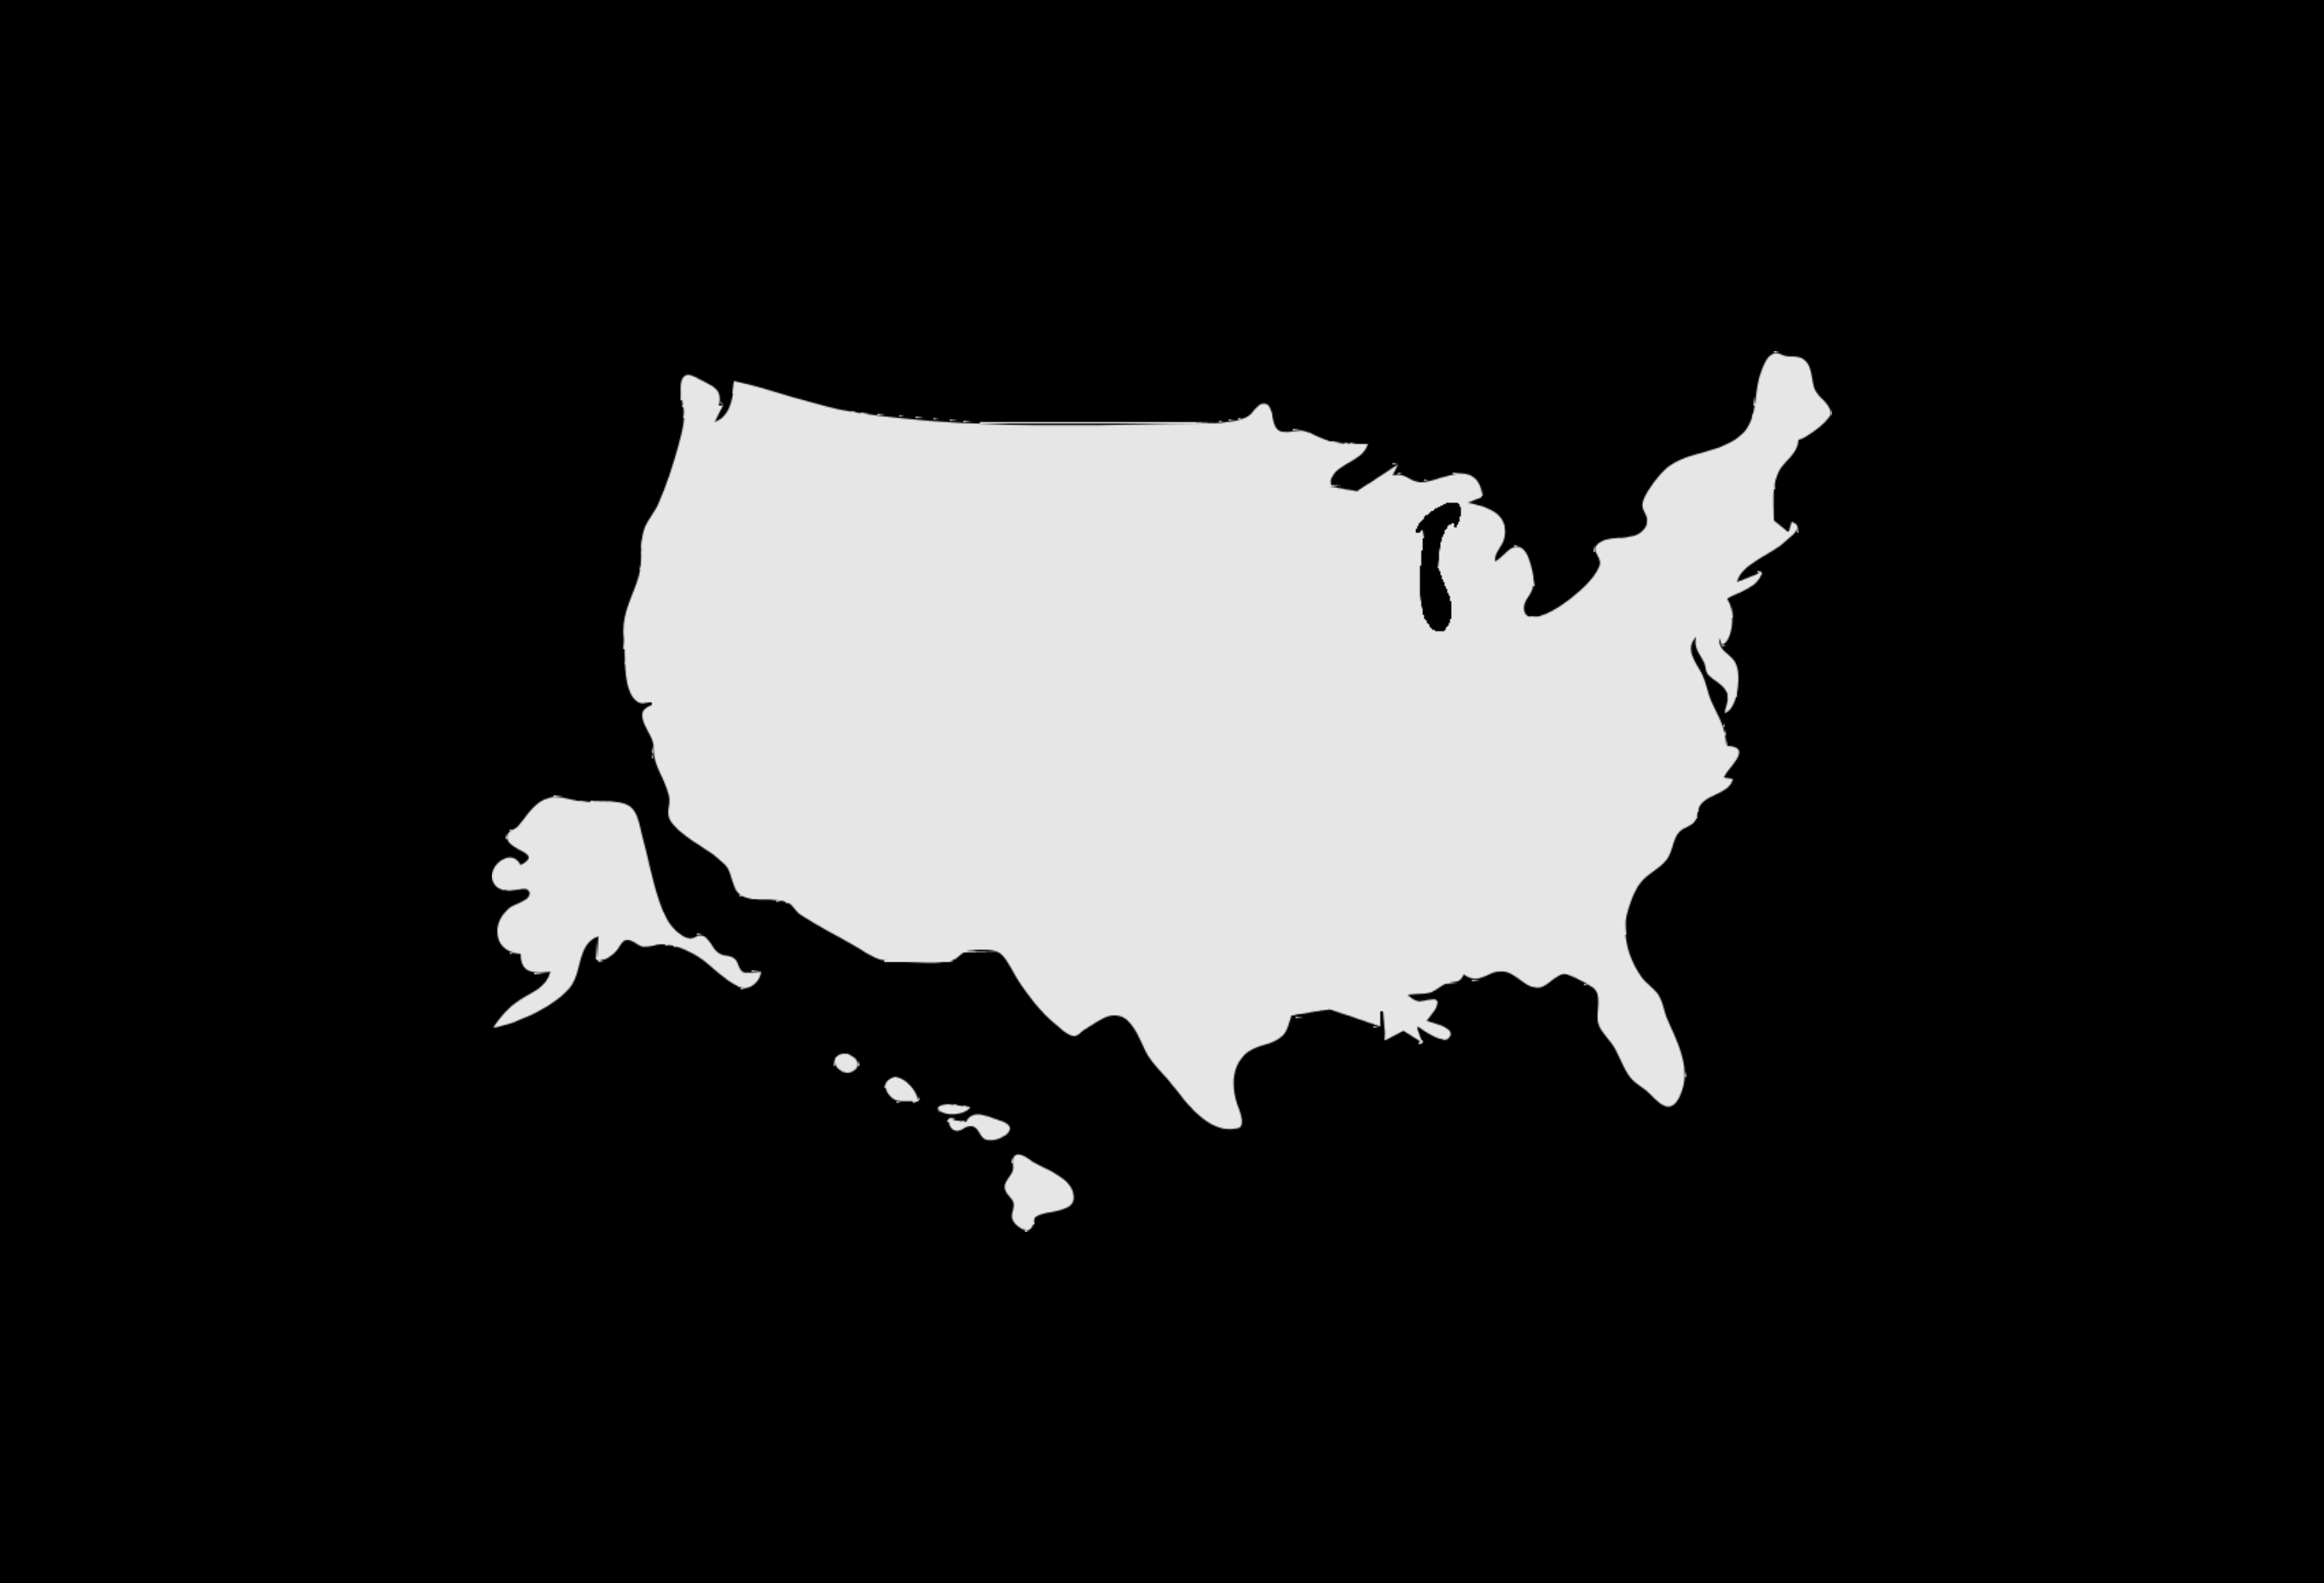 USA Map Car Decal - Permanent Vinyl Sticker for Cars, Vehicle, Doors, Windows, Laptop, and more!